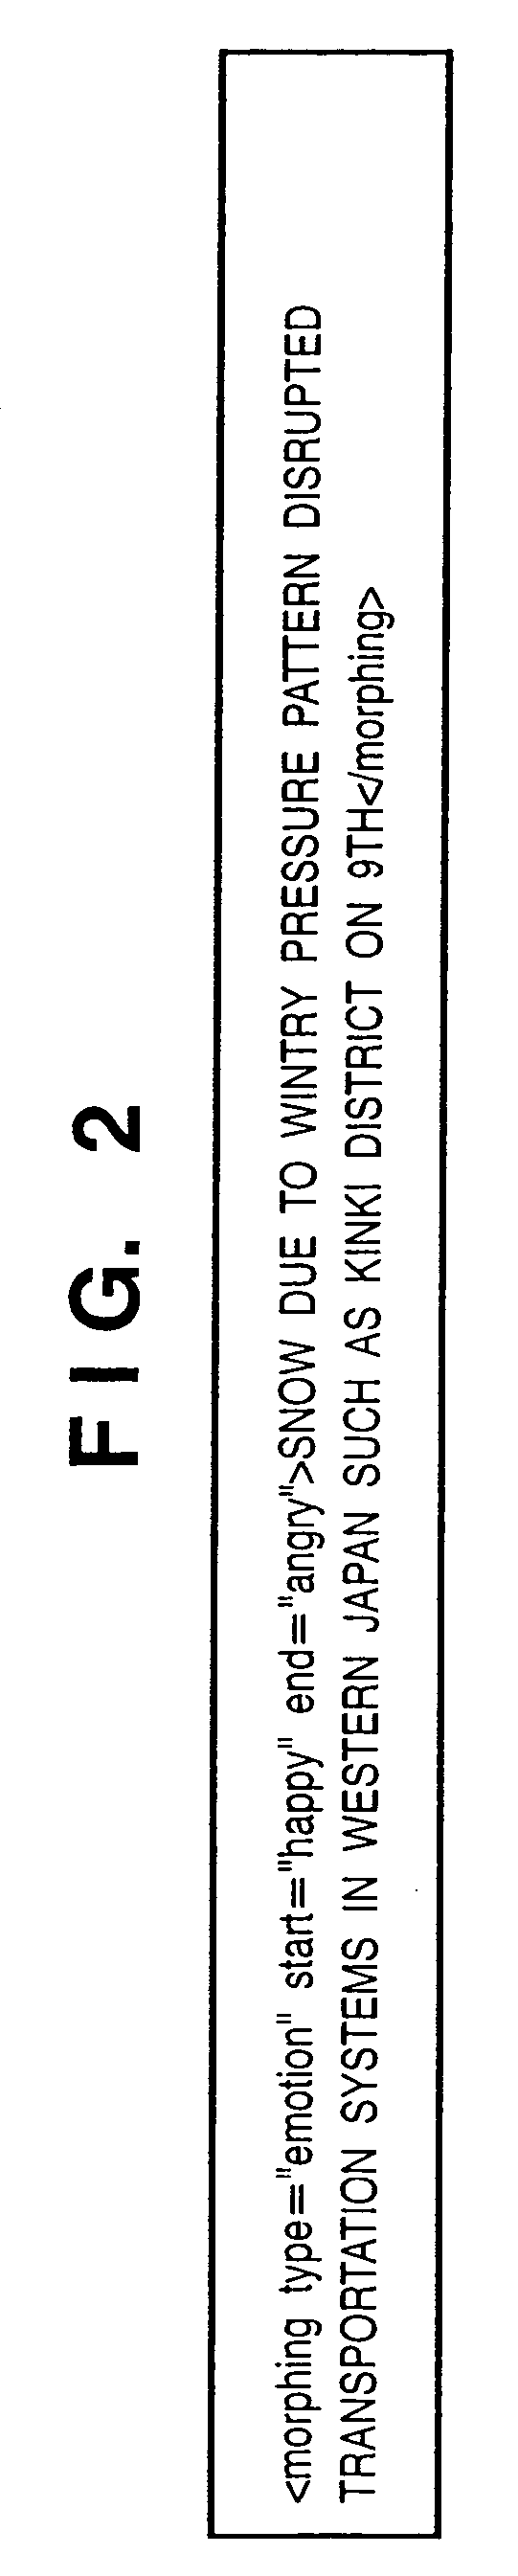 Text structure for voice synthesis, voice synthesis method, voice synthesis apparatus, and computer program thereof